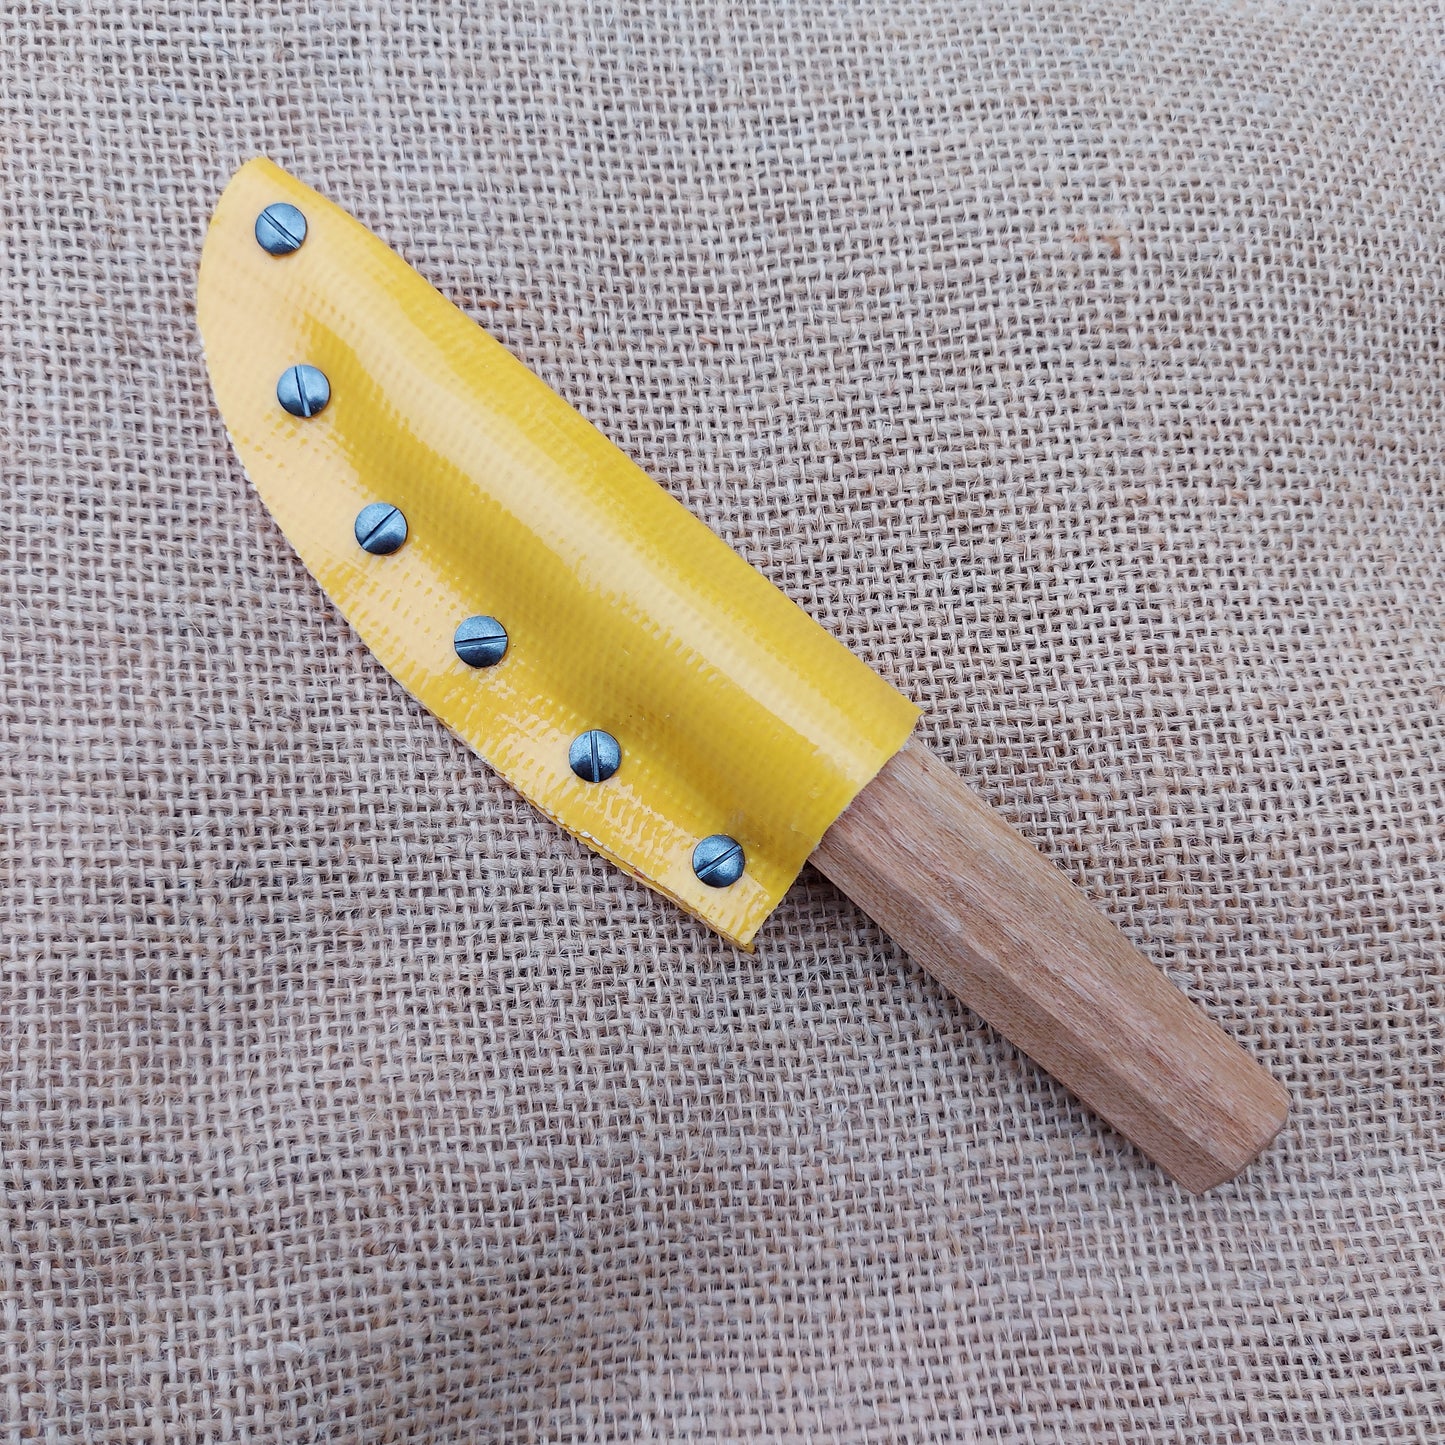 Hook Knife for Spoon Carving - Right Hand (RH)